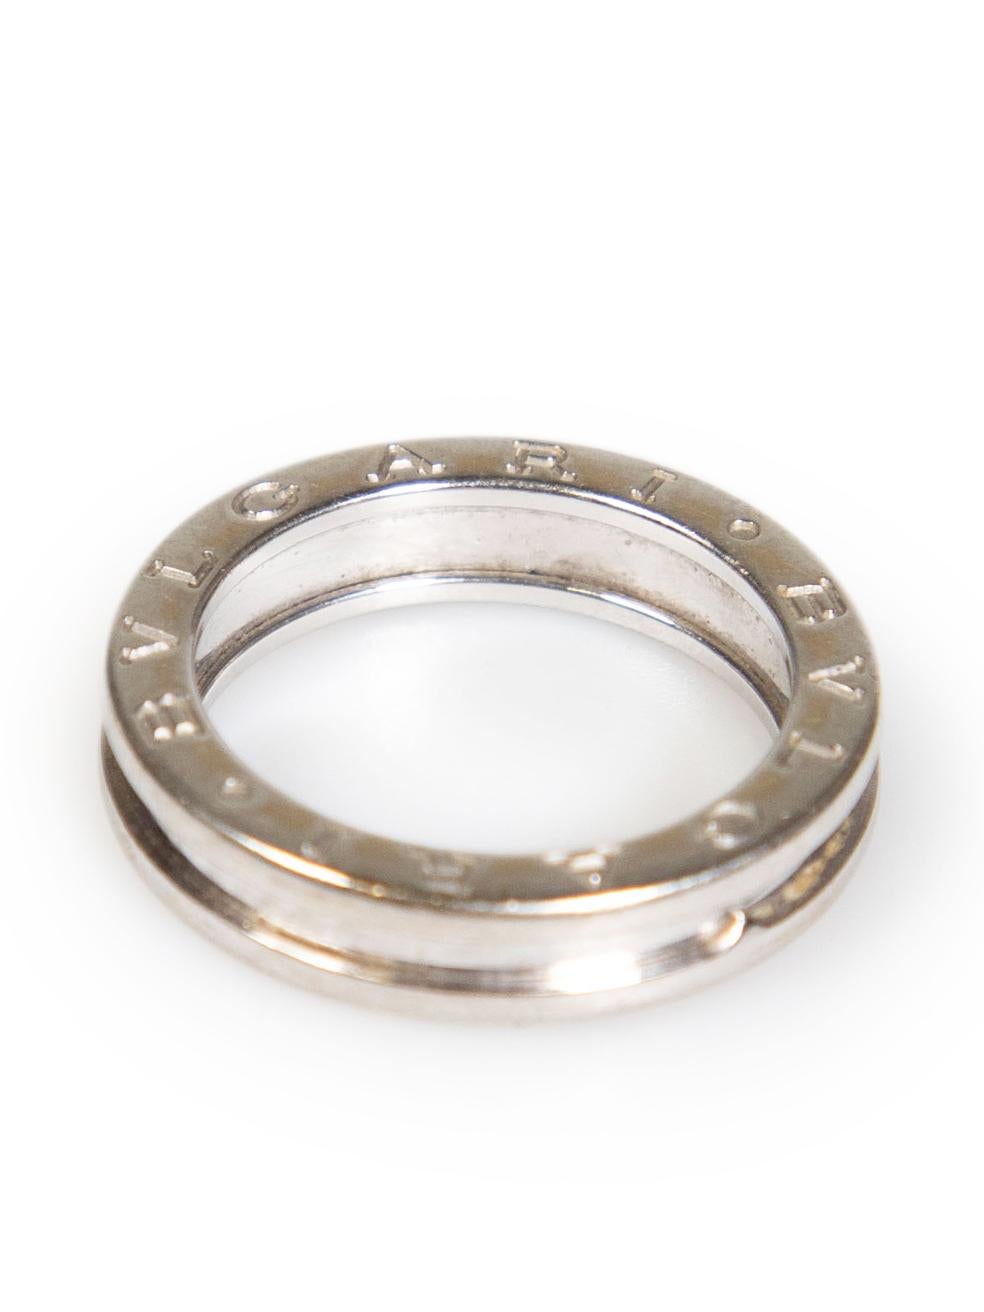 CONDITION is Very good. Minimal wear to ring is evident. Minimal wear to the metal with light scratches on this used Bvlgari designer resale item.
 
Details
Model: B.zero1
Silver
White gold
Ring
Engraved logo
 
Made in Italy
 
Composition
White